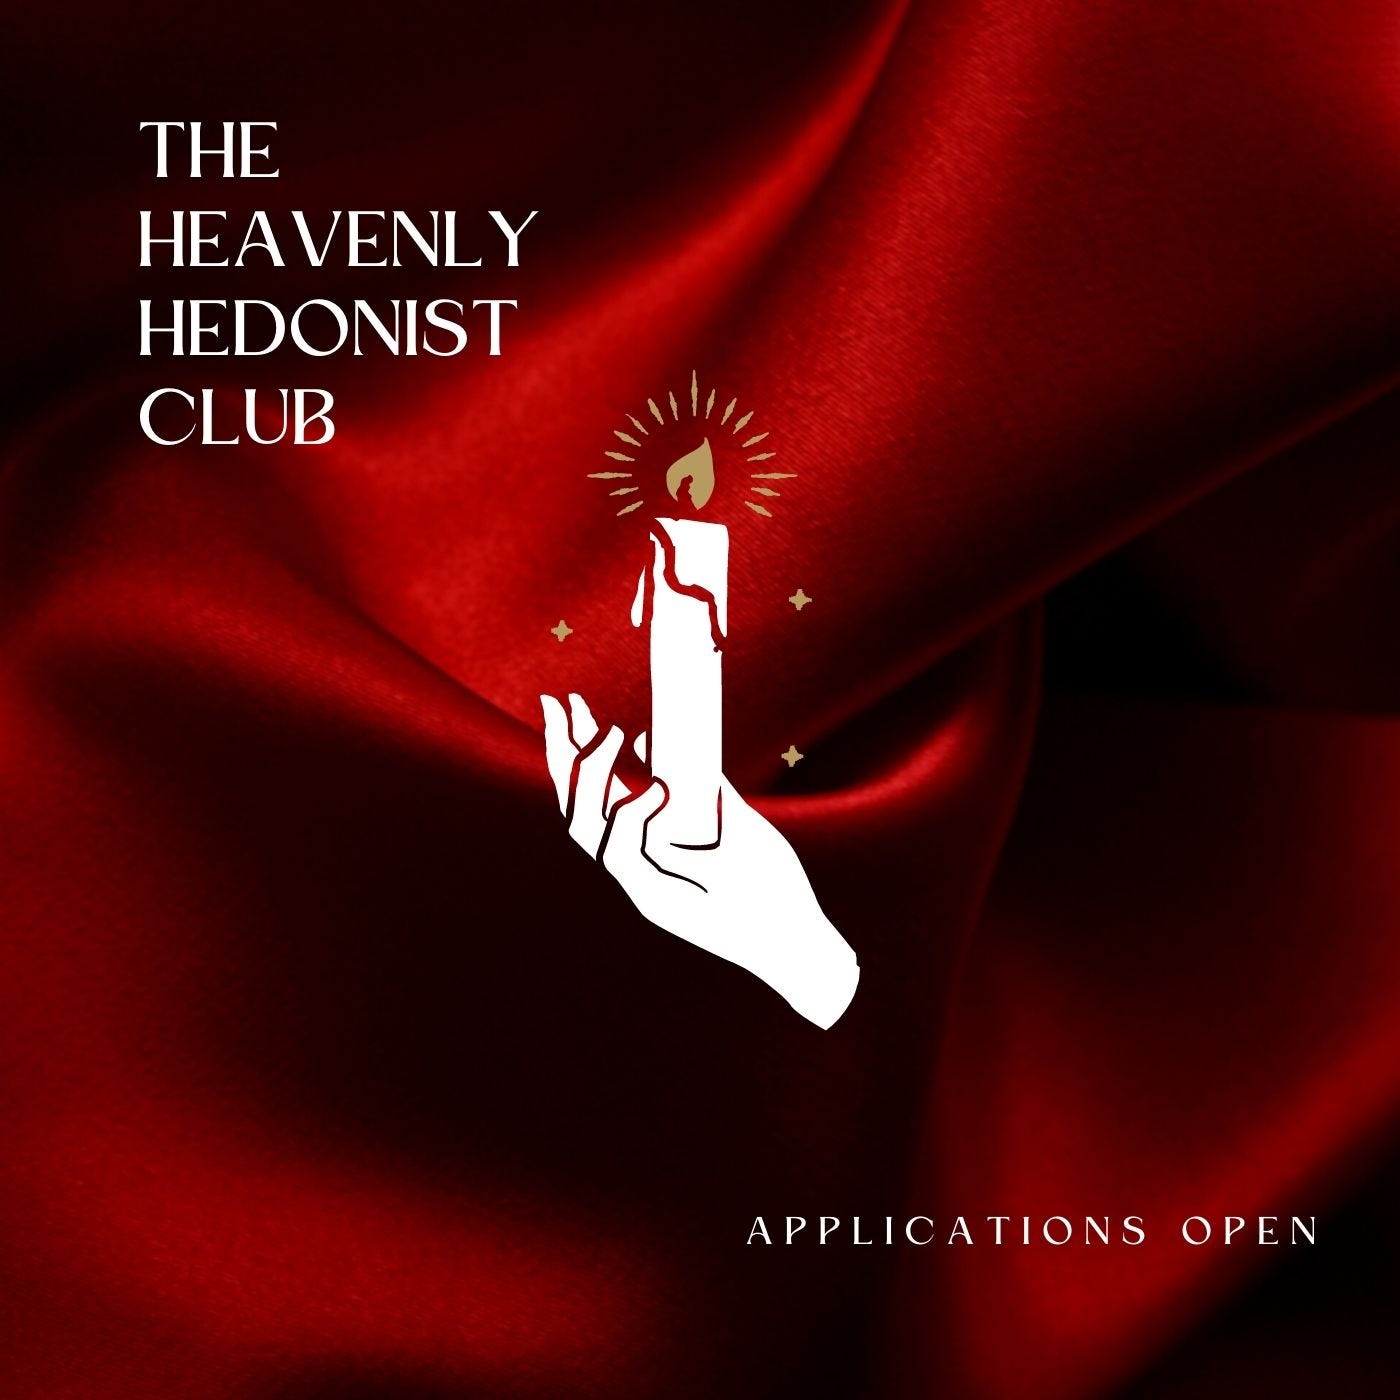 a graphic of a hand holding a lit candle over a red silk background, with the text THE HEAVENLY HEDONIST CLUB